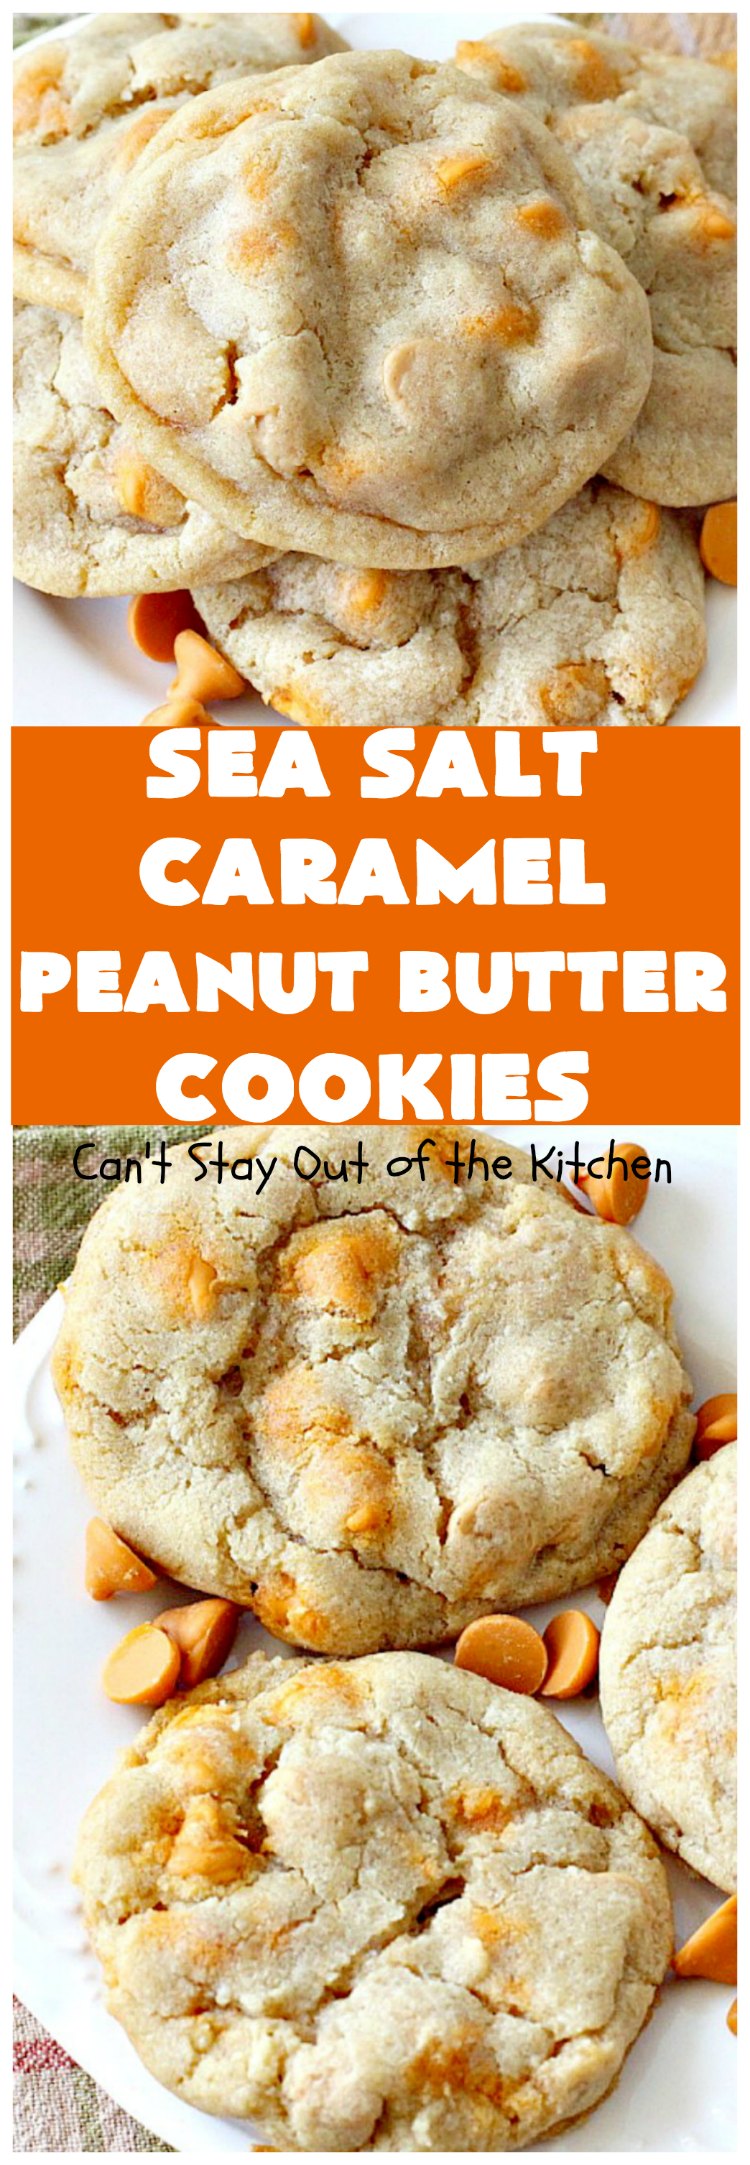 Sea Salt Caramel Peanut Butter Cookies | Can't Stay Out of the Kitchen